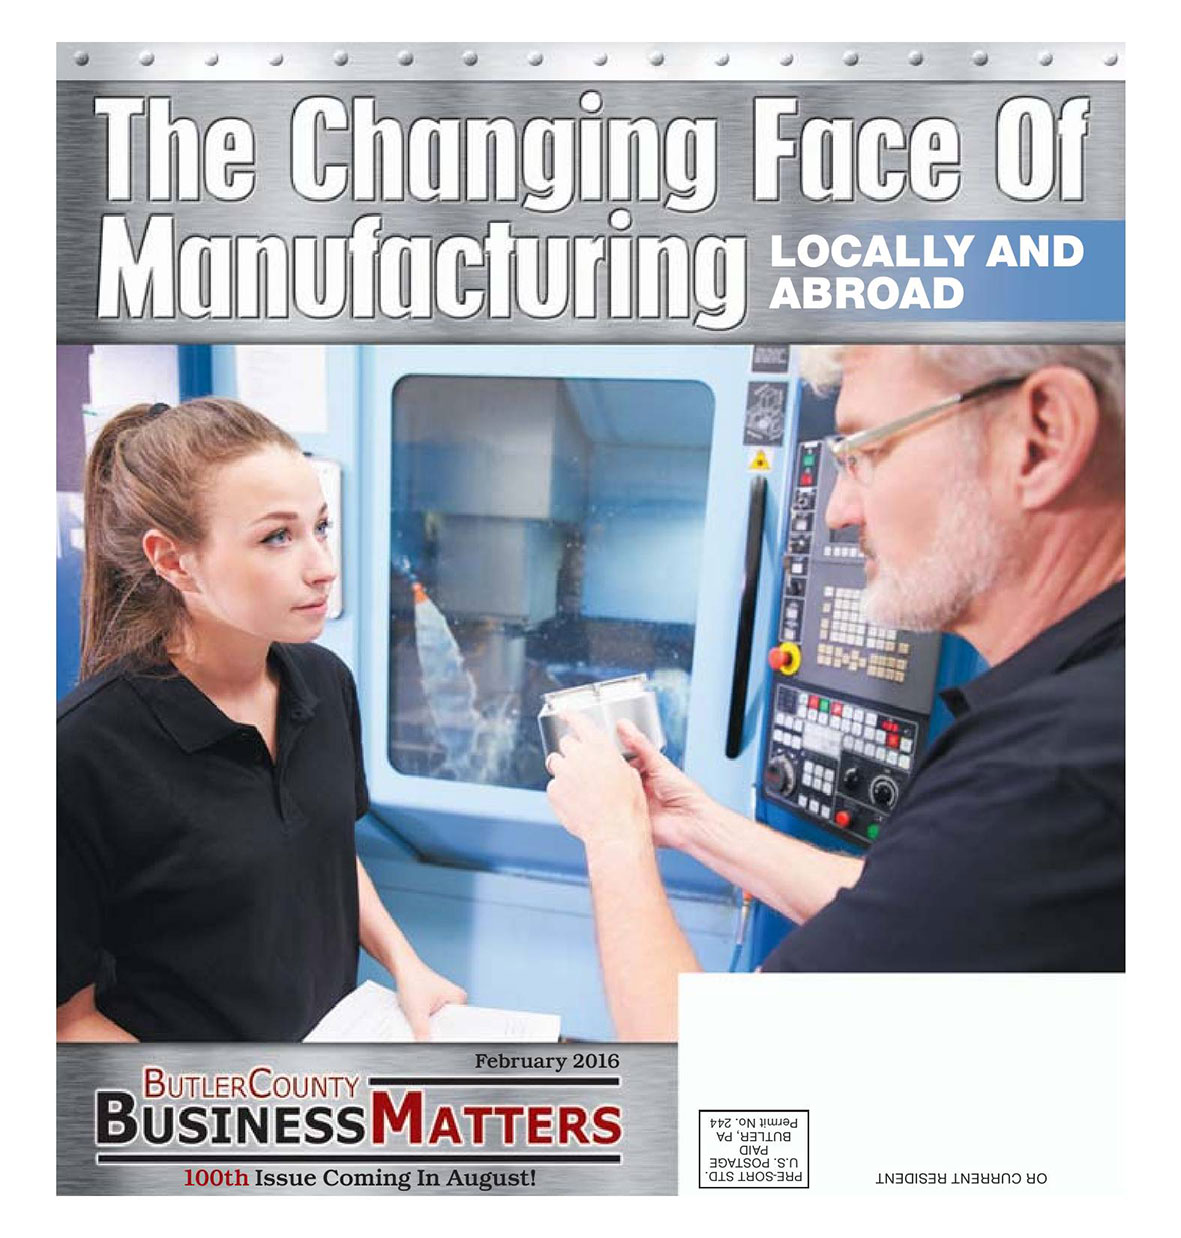 February 2016 - The Changing Face of Manufacturing Locally and Abroad